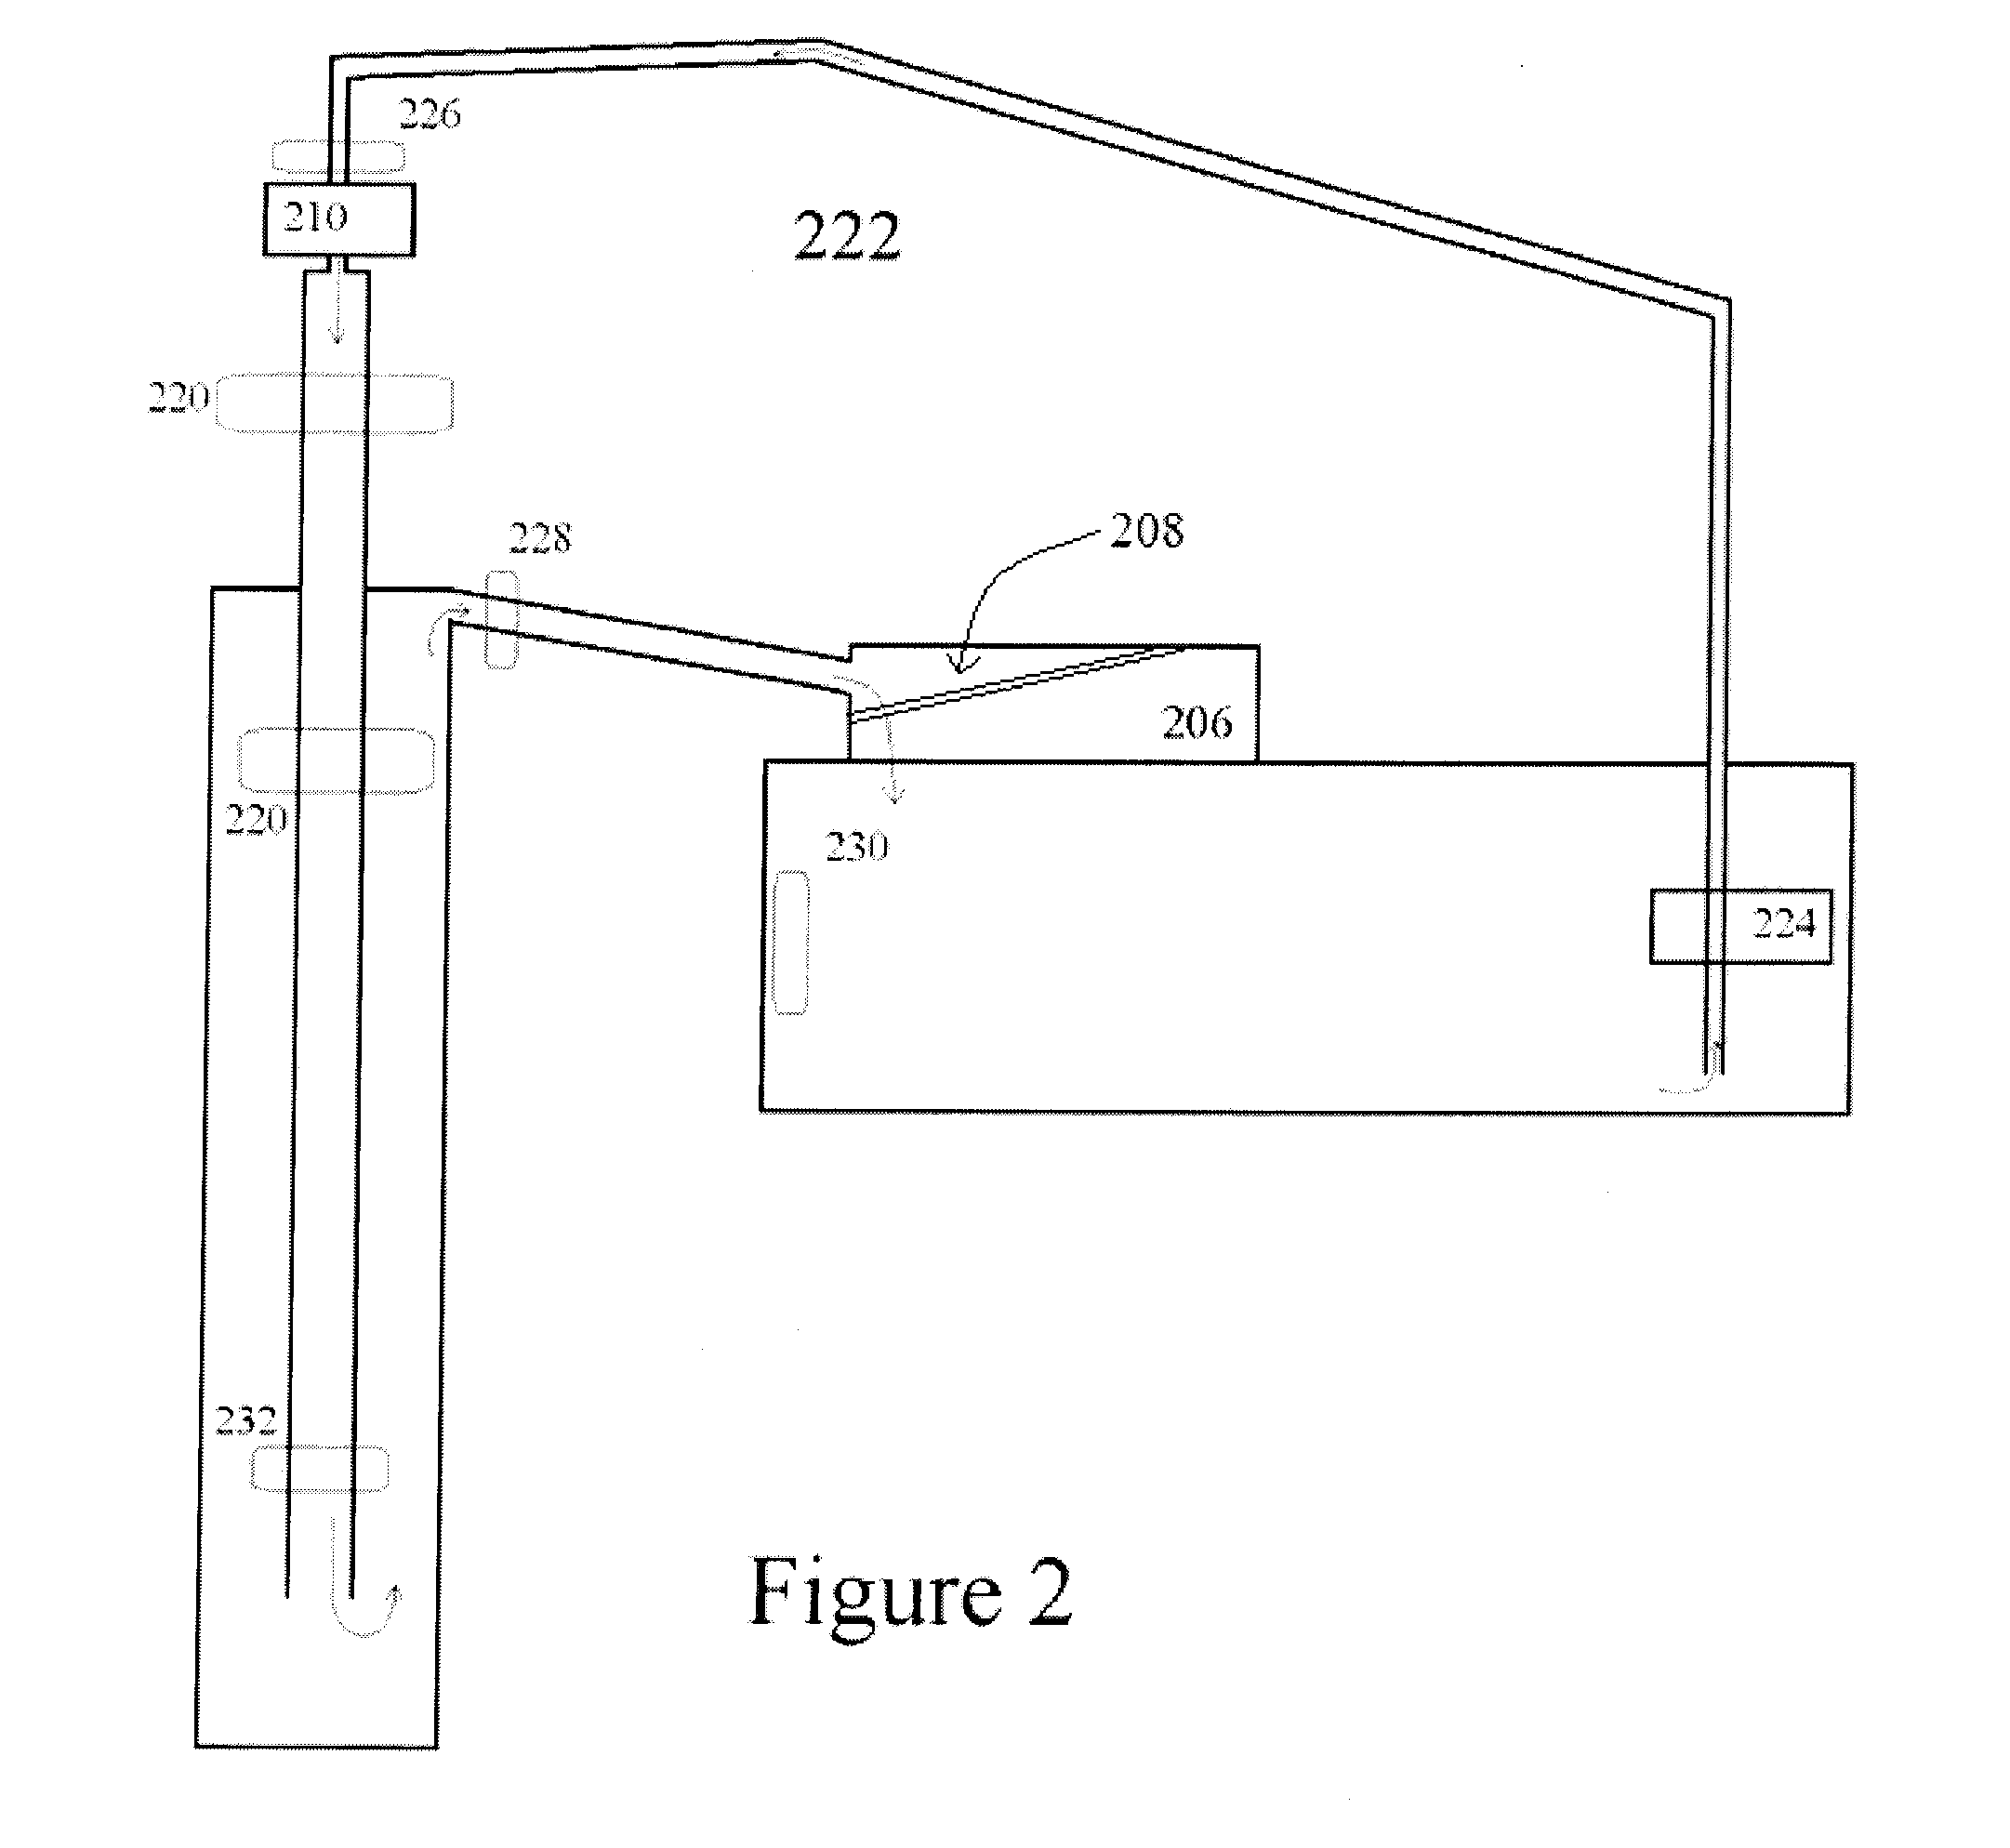 System and method for measuring characteristics of cuttings and fluid front location during drilling operations with computer vision